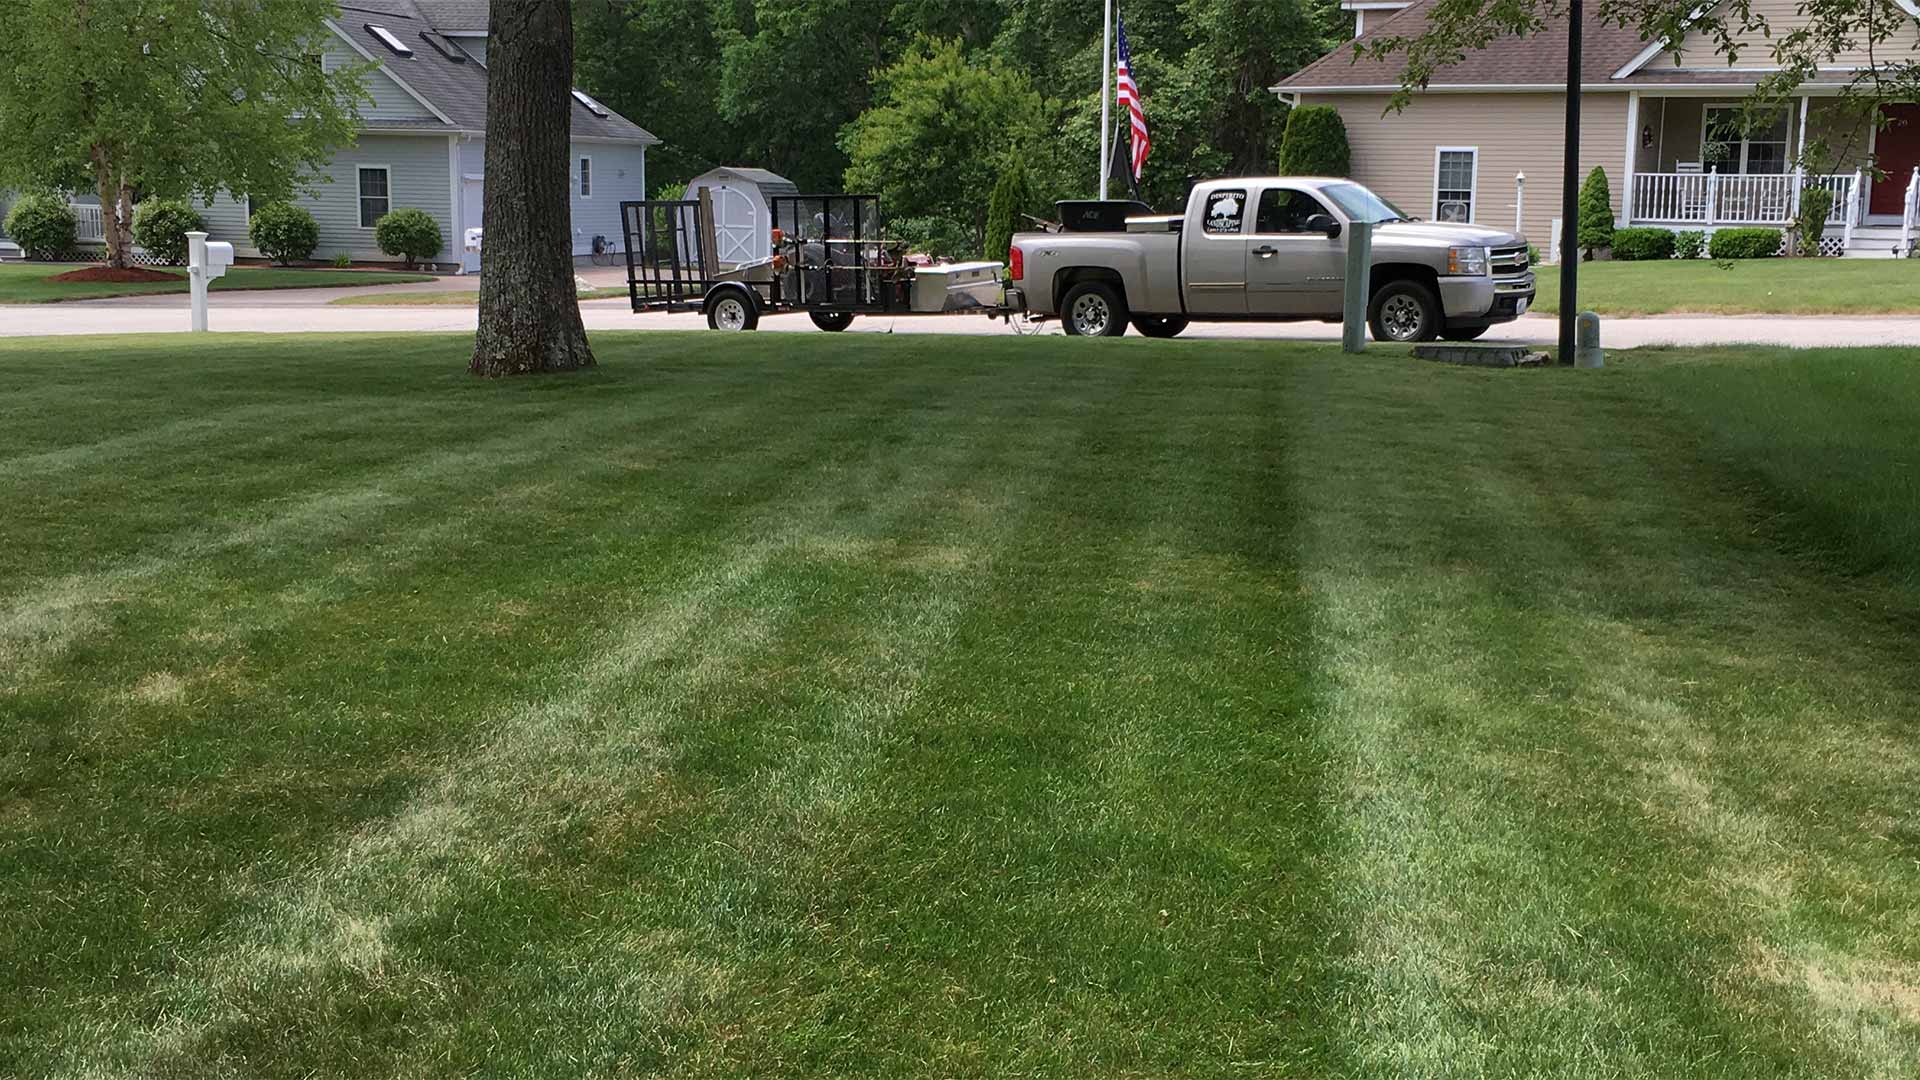 DiSpirito Landscaping LLC work truck after completing a lawn mowing job in Charlestown, RI.